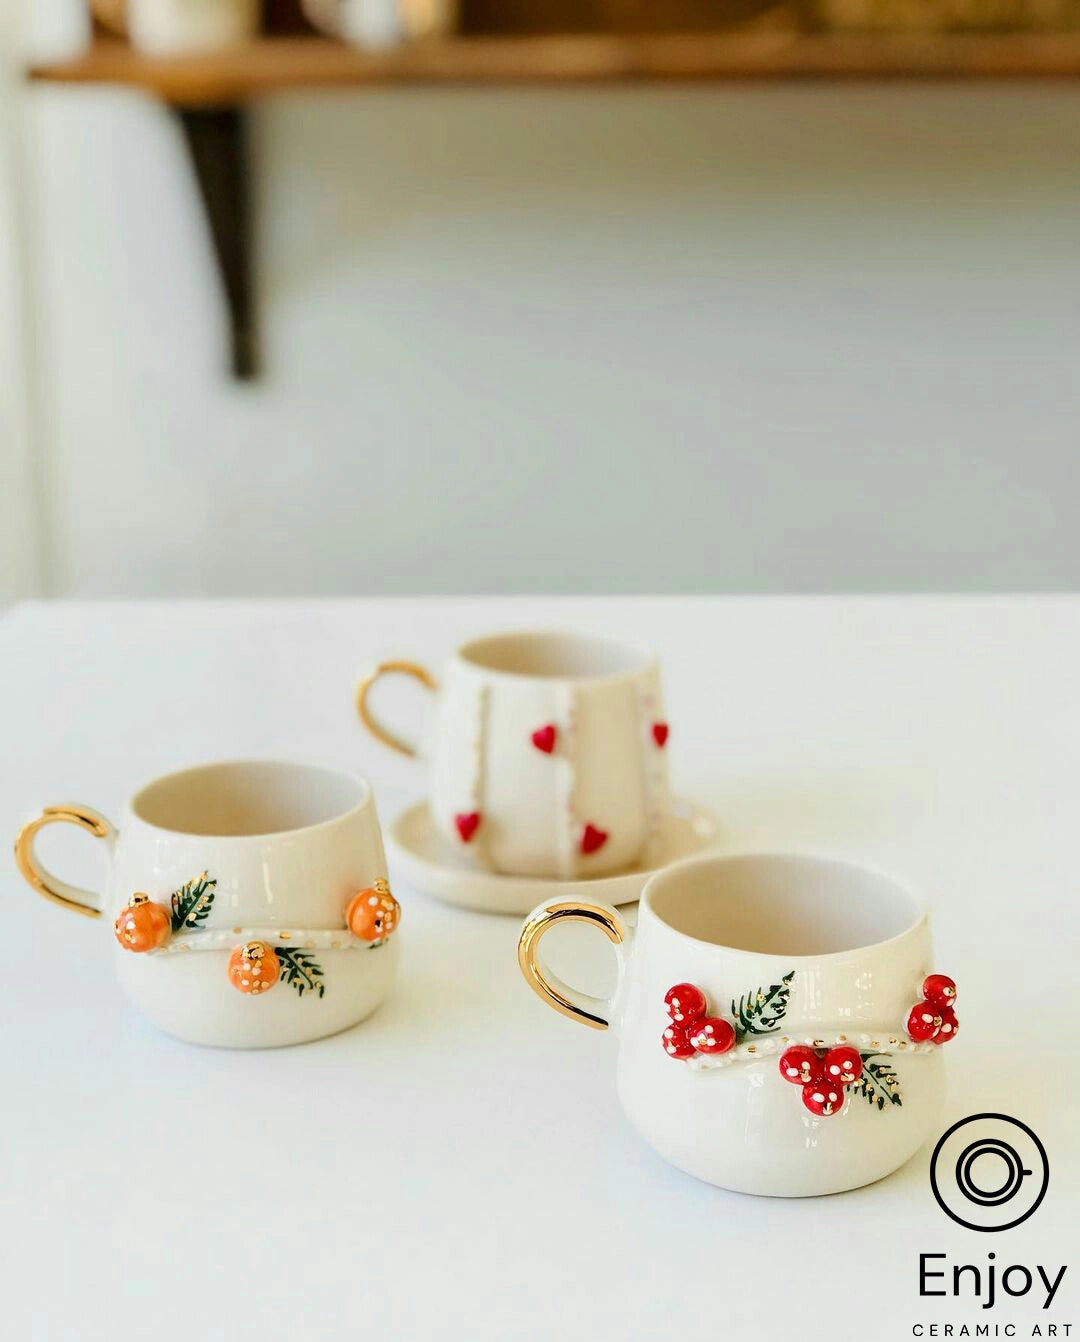 Three white ceramic mugs with gold handles, each adorned with a different festive design—pumpkins, hearts, and berries—on a white surface.